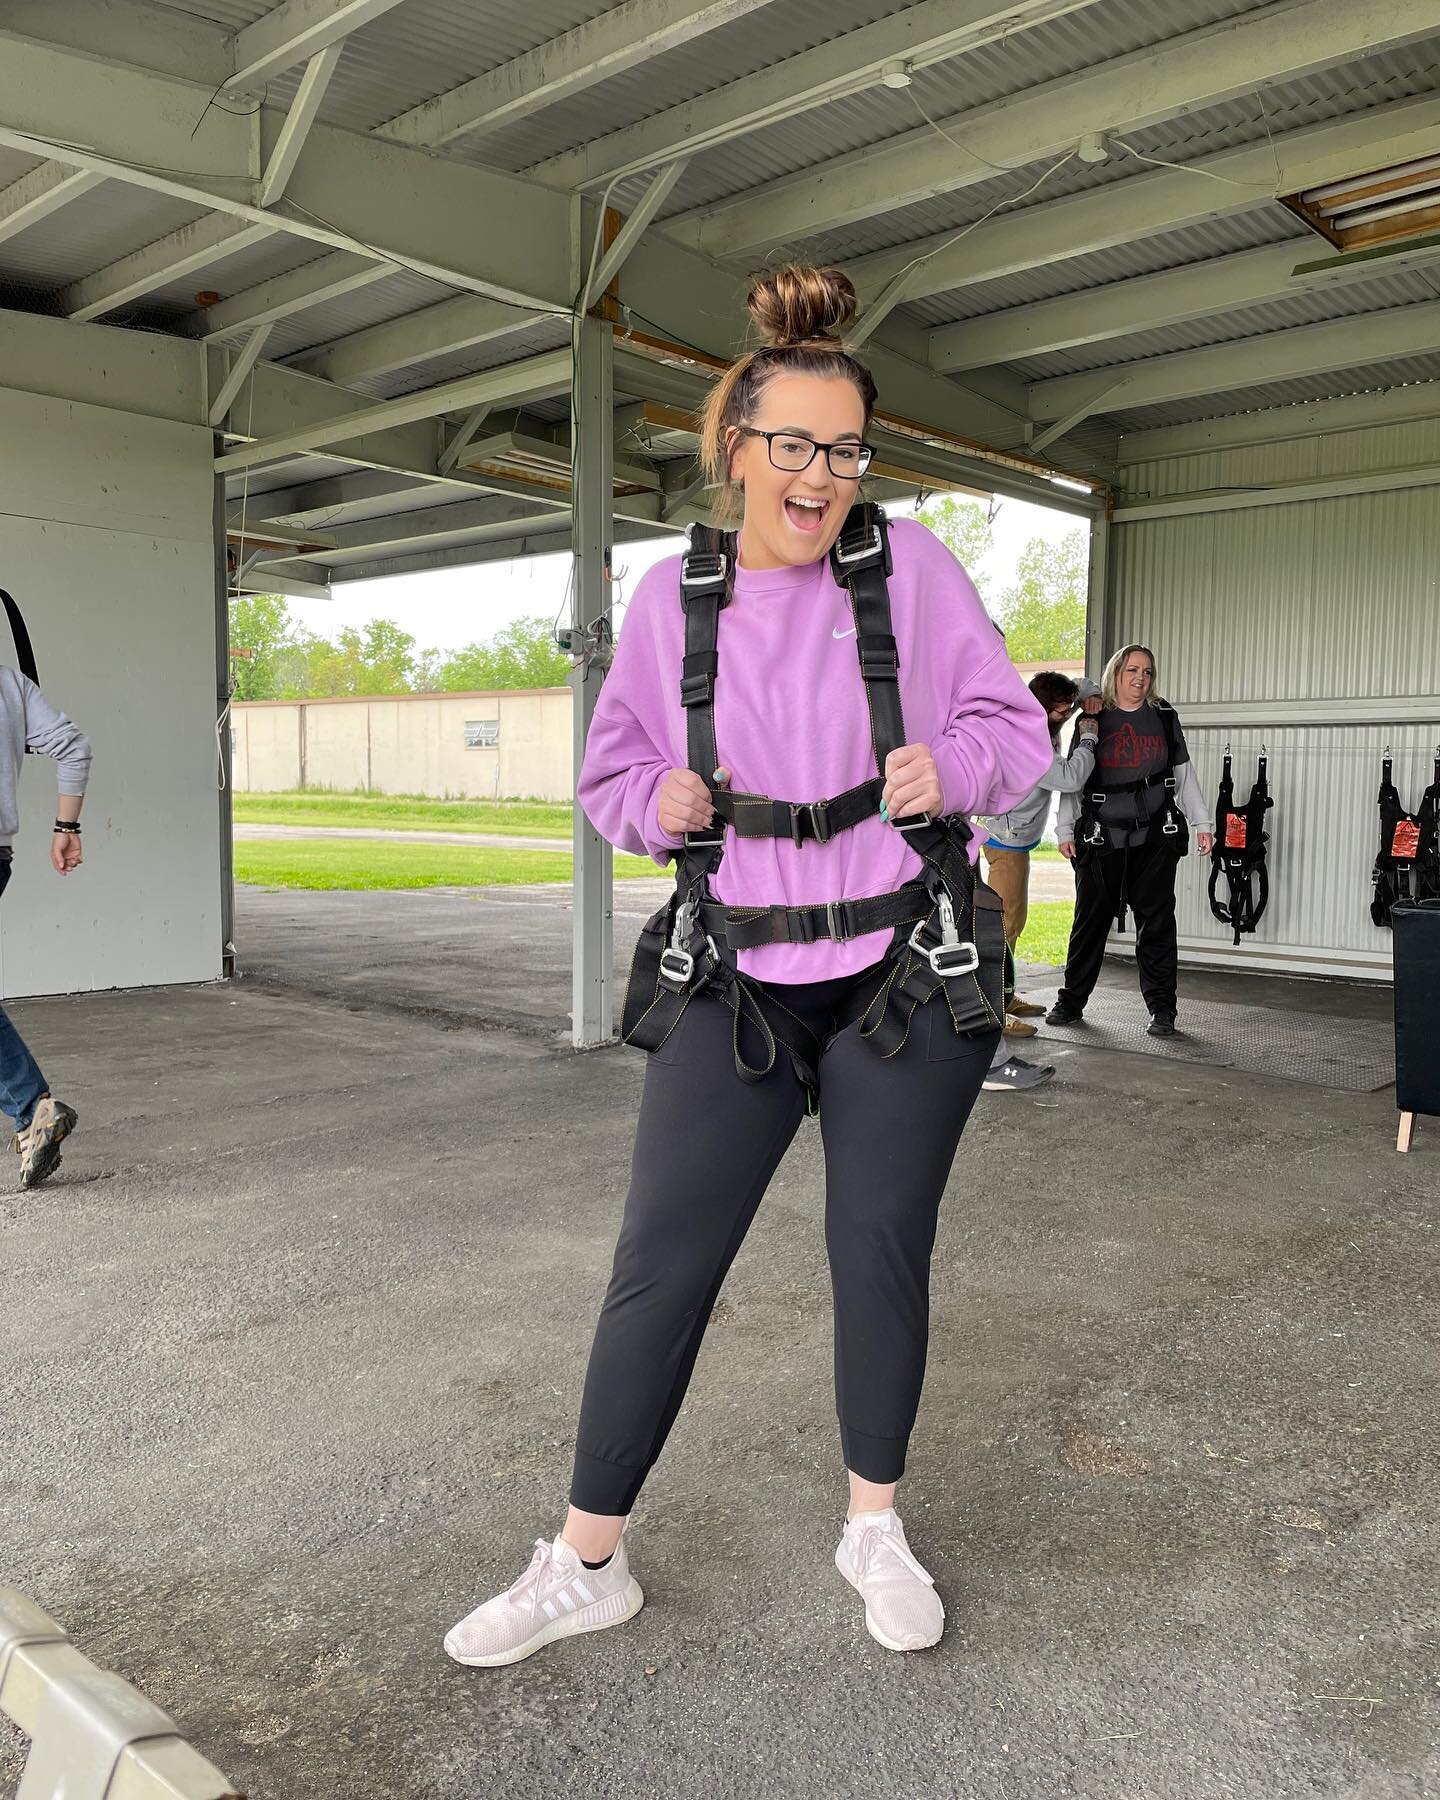 &ldquo;Feel the fear and do it anyway&rdquo; 
  26 never felt so good!
@skydivestlouis